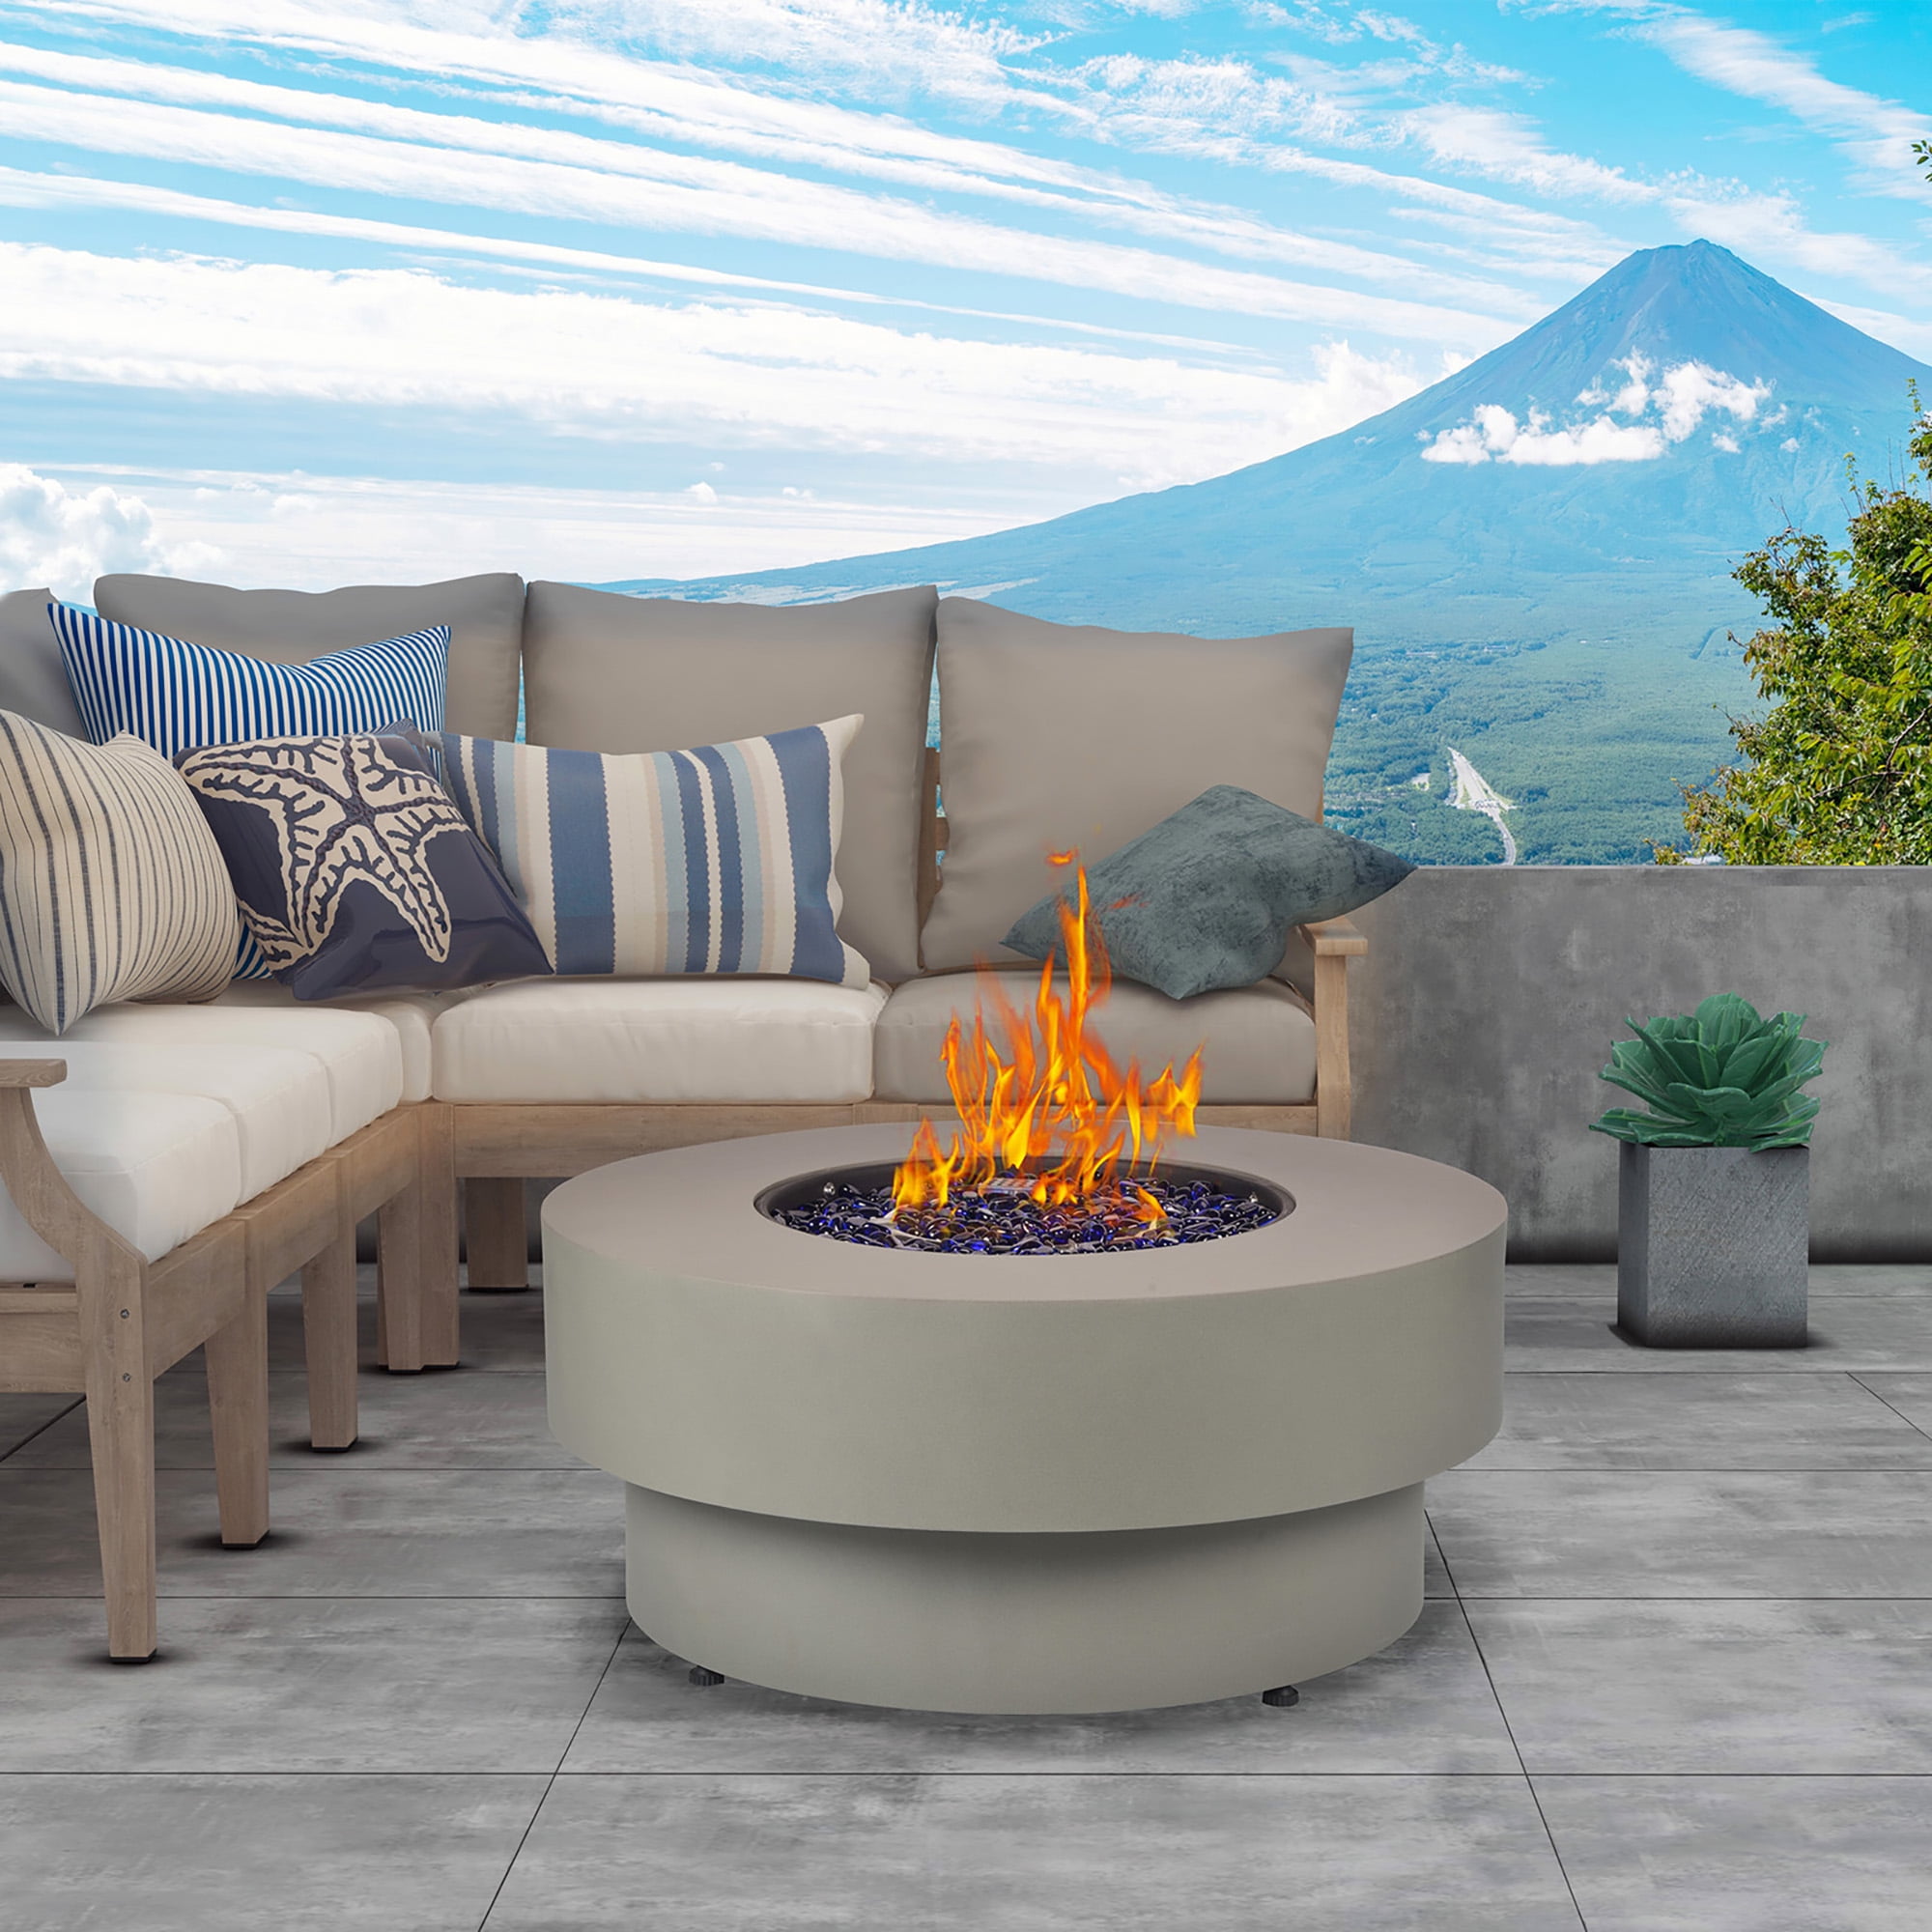 BAIDE HOME 32.5 Round 50,000 BTU Gas Fire Pit Table for Outdoor Patio  Garden Backyard Decking with Lid, Fire Glass, Cover, 10FT Propane Hose